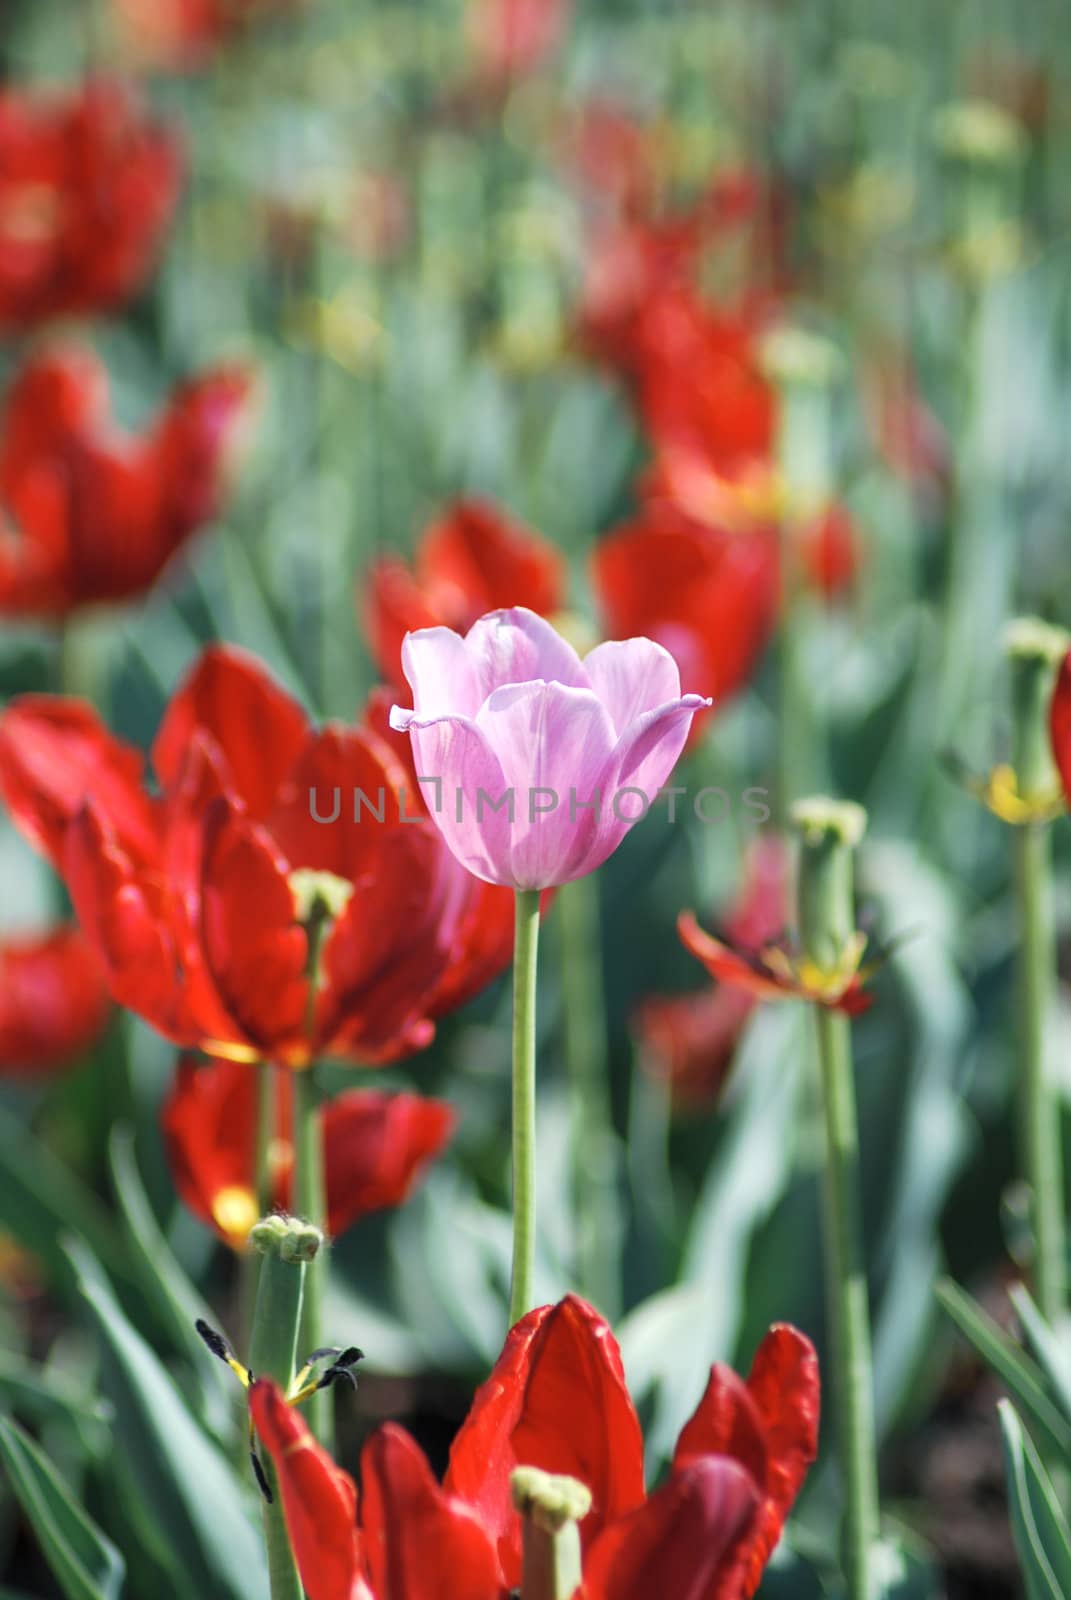 One pink tulip on red tulips in background by svtrotof